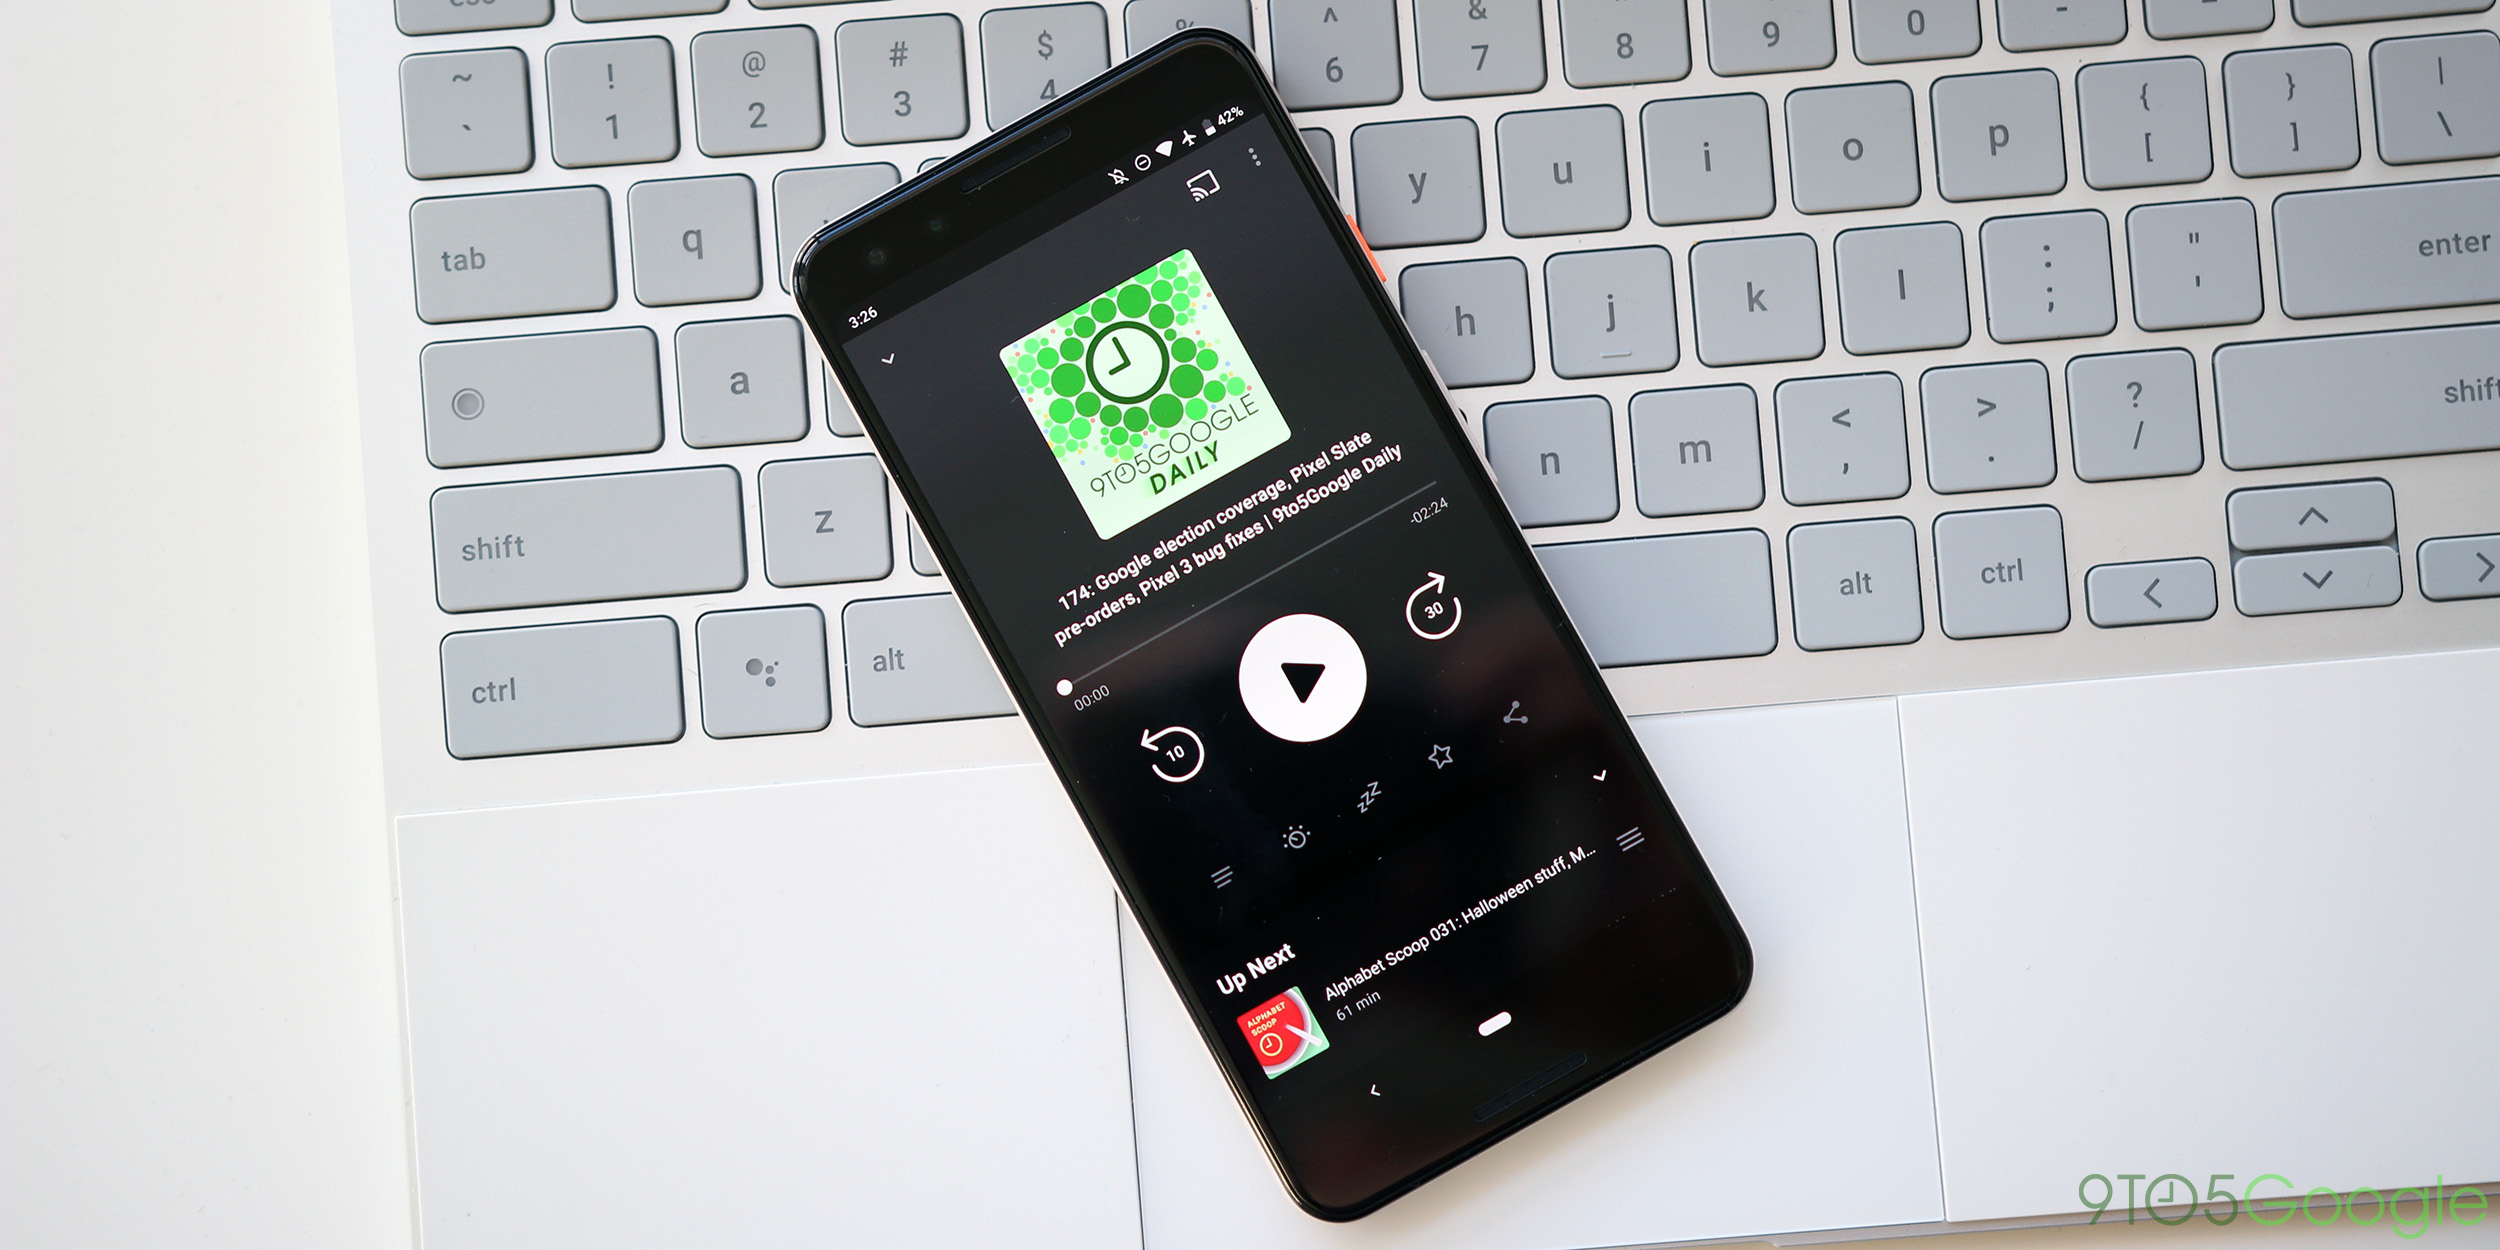 run pocket casts for pc